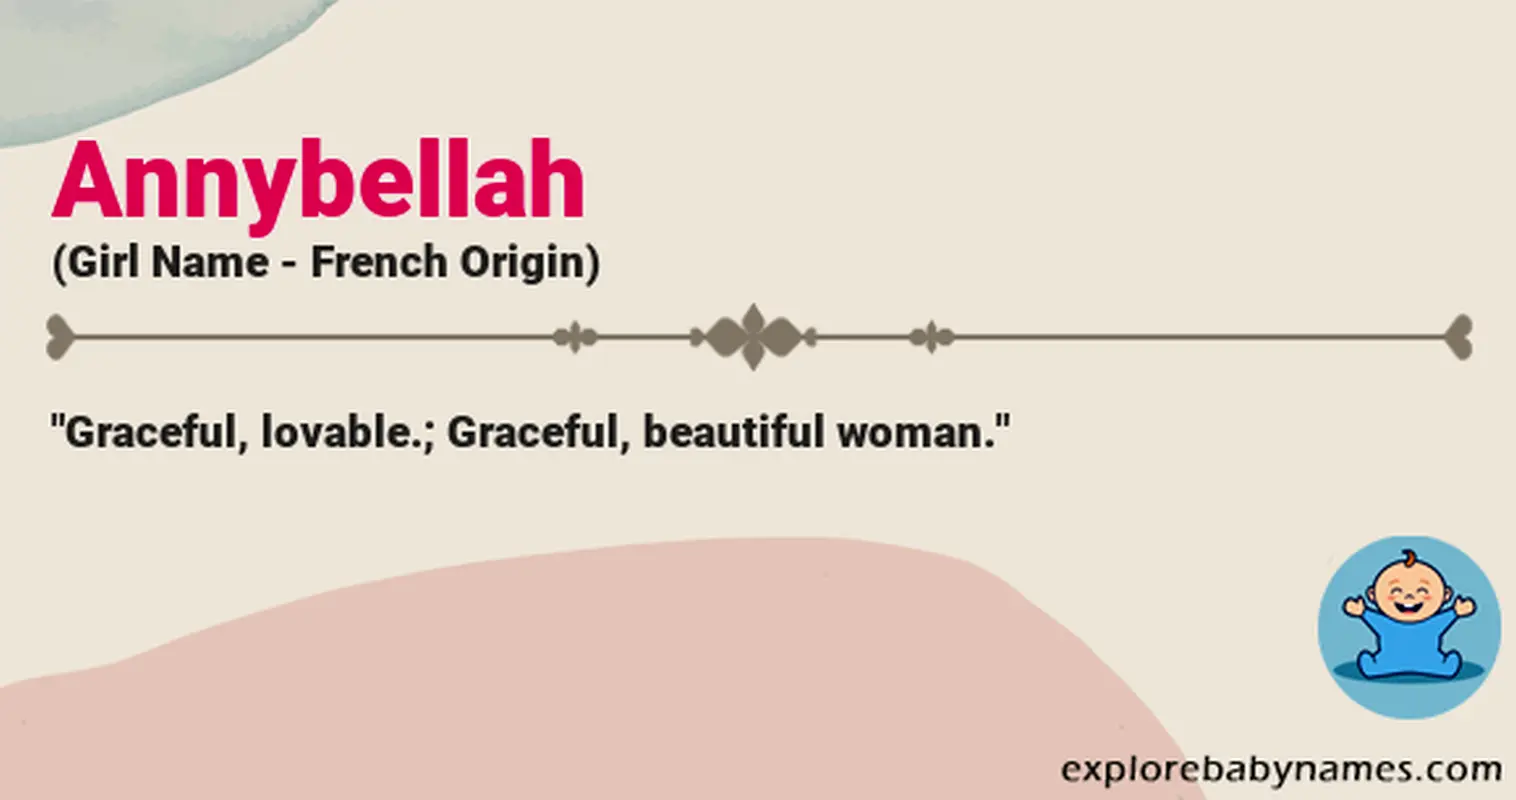 Meaning of Annybellah